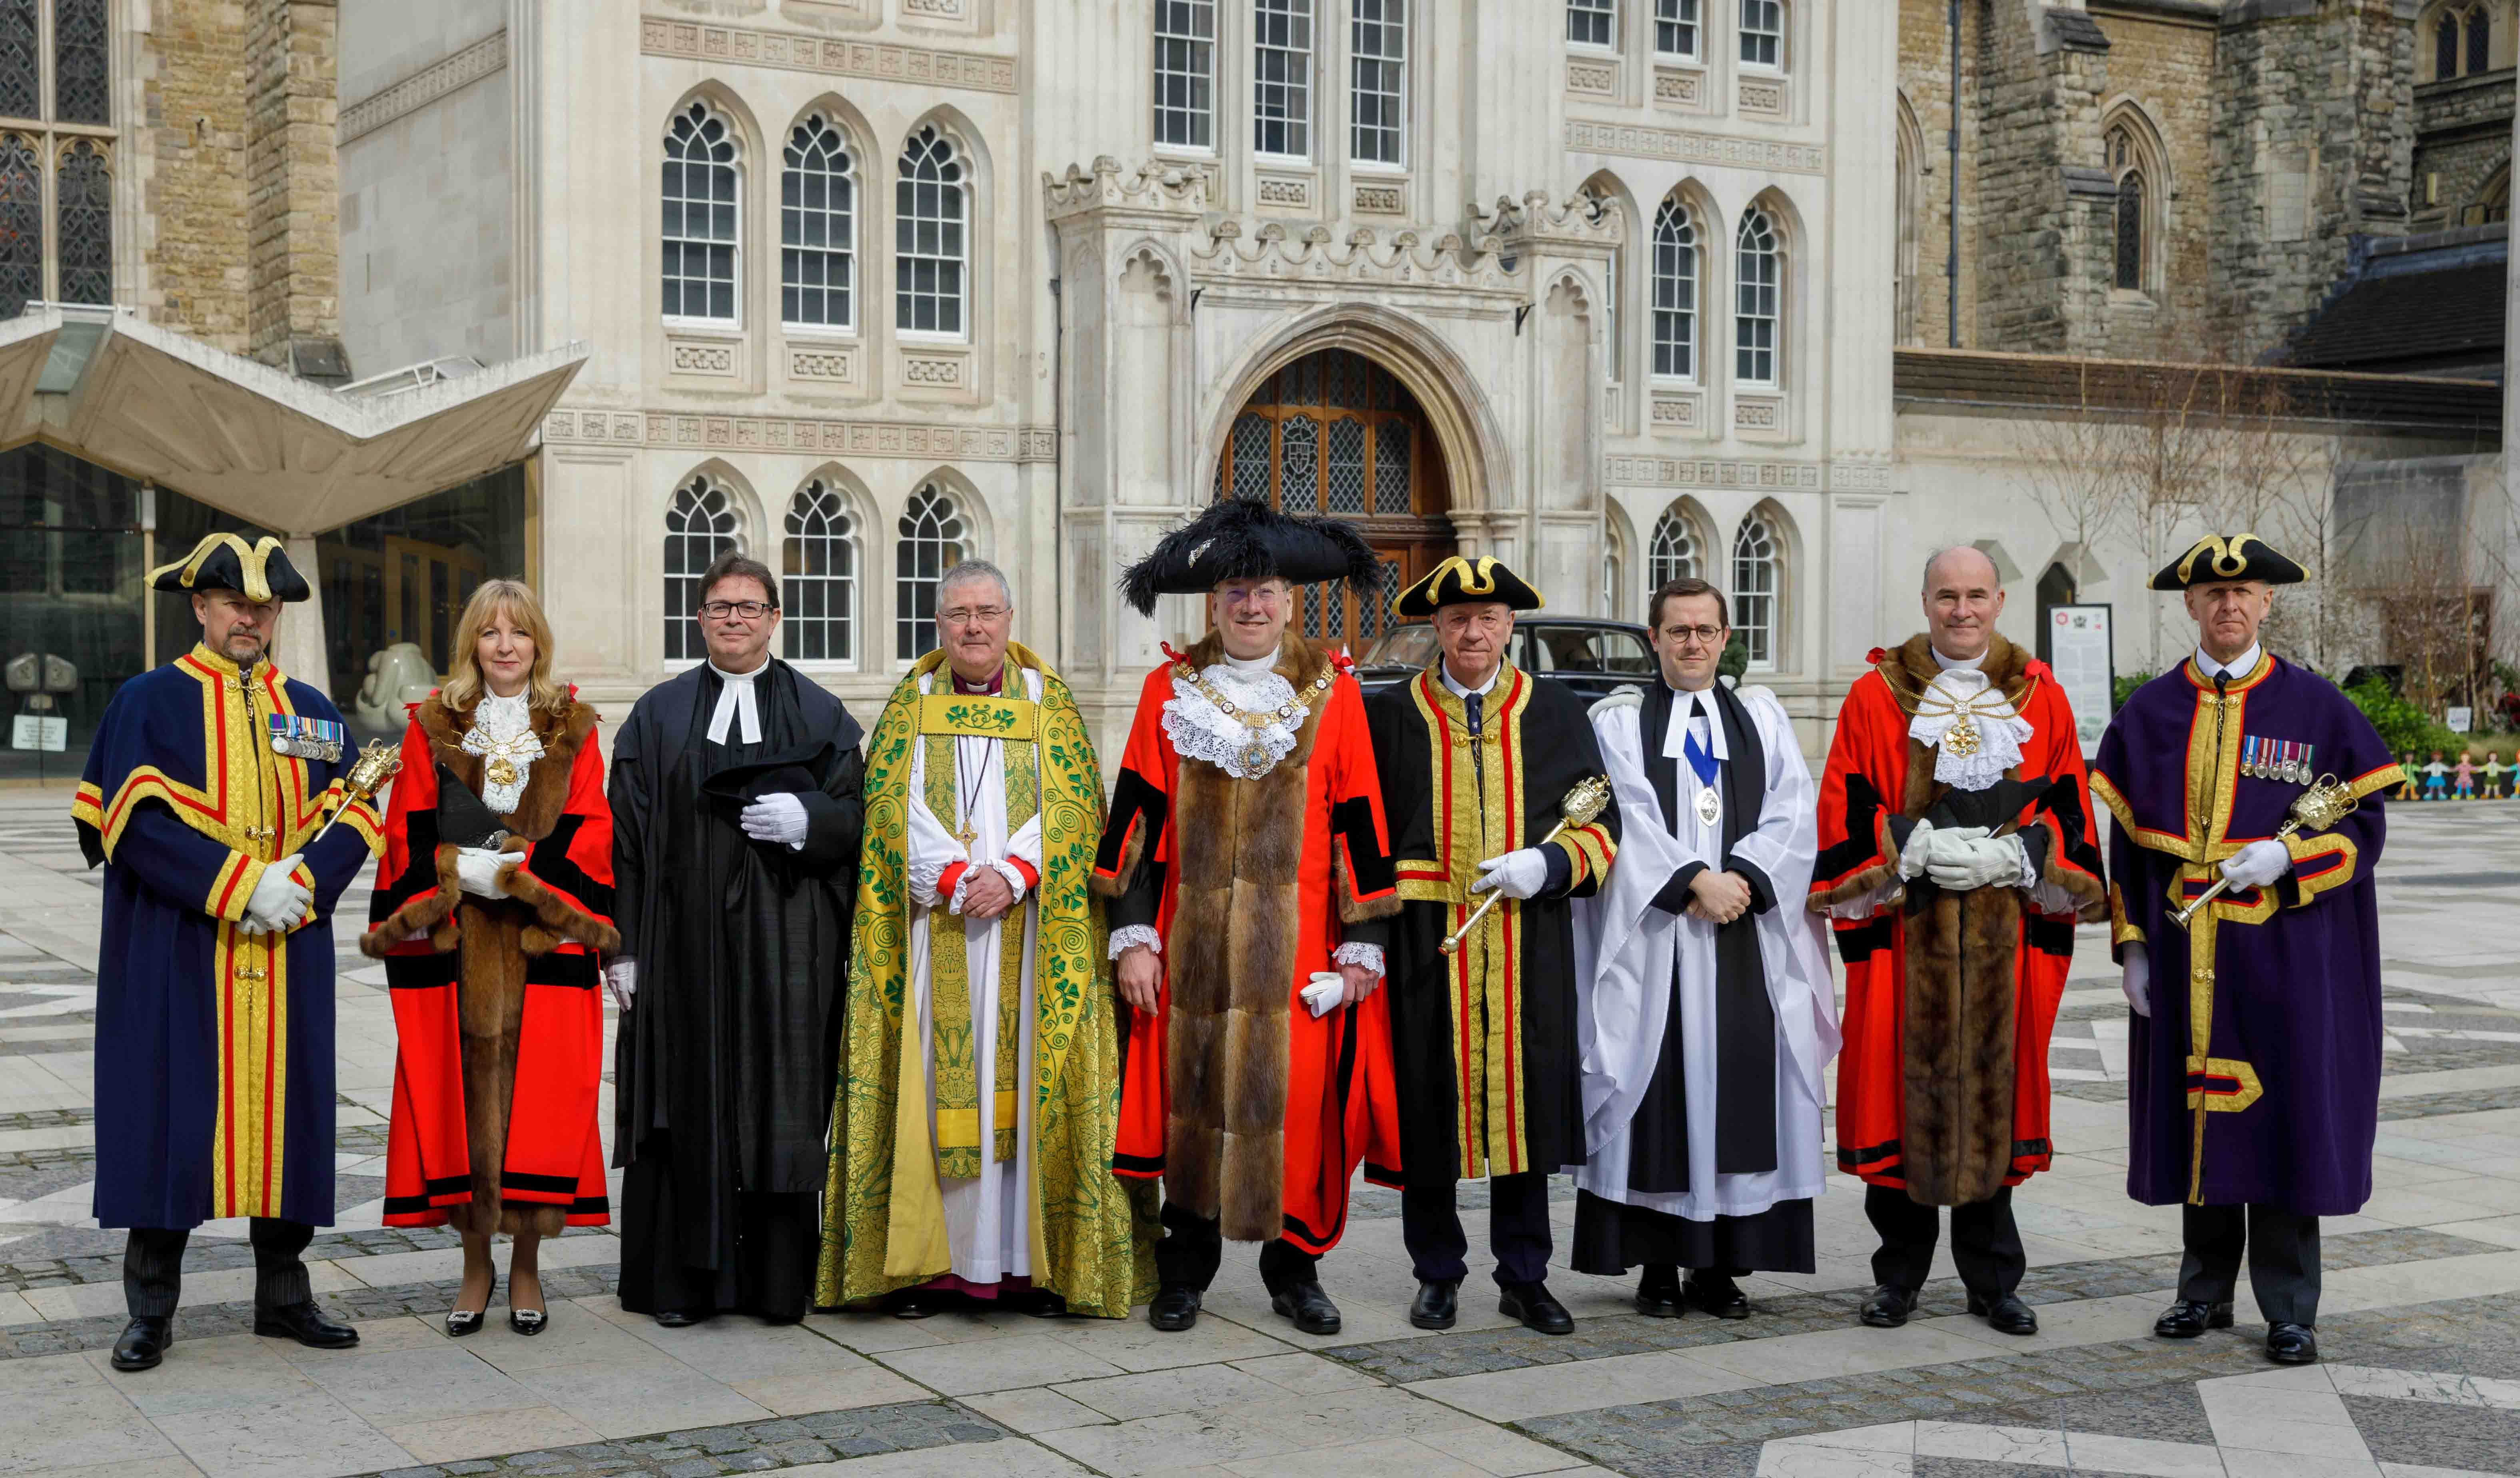 Clergy and civic representatives following the service. Credit: Gerald Sharp Photography.